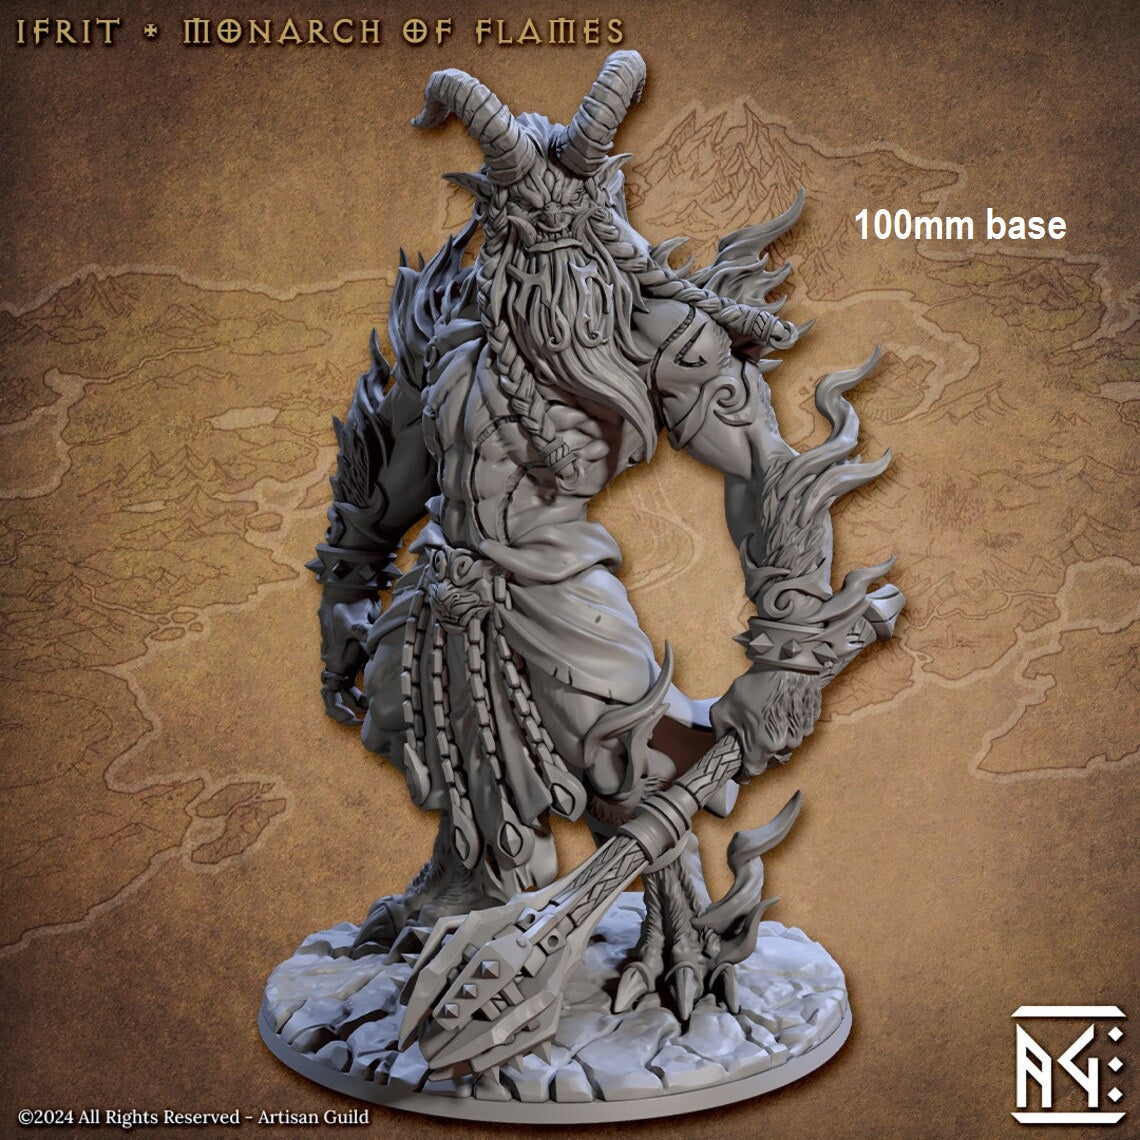 Image shows an 3D render of an ifrit gaming miniature holding a mace